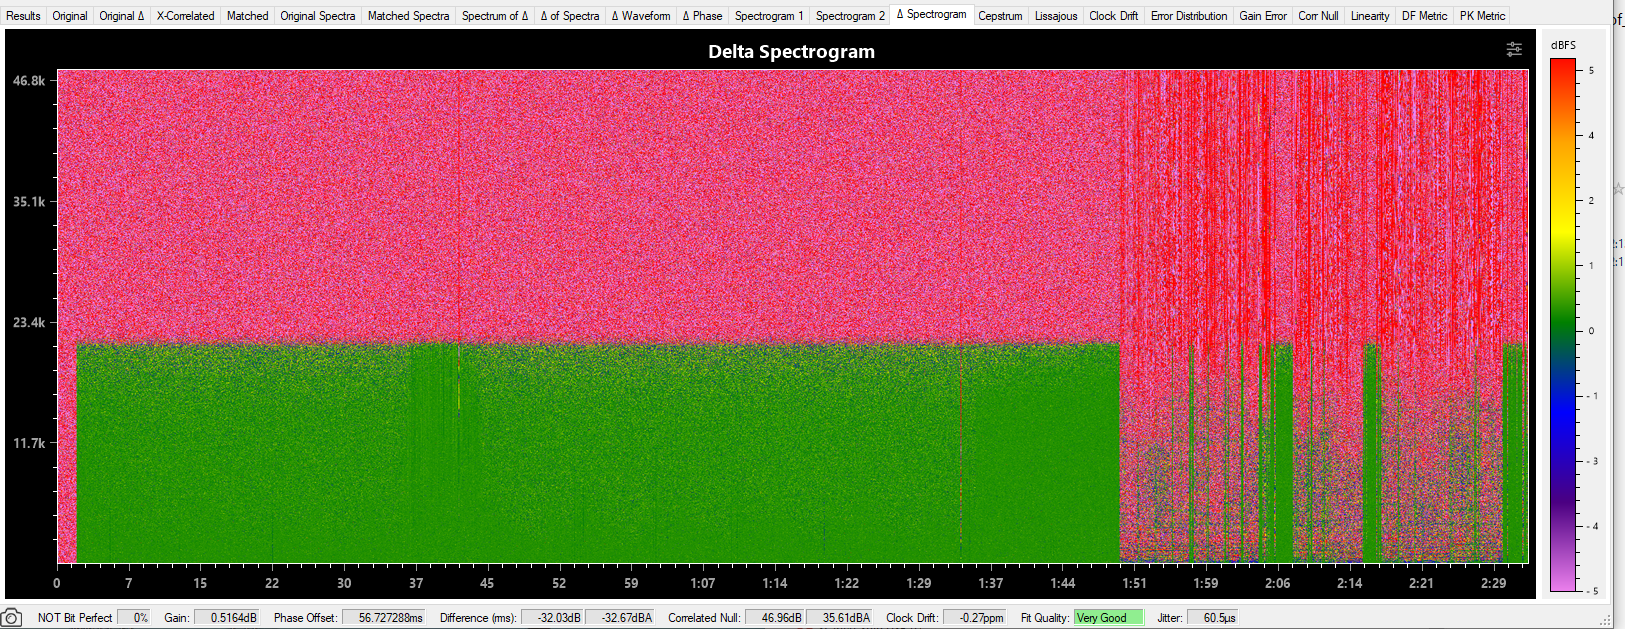 delta_spectrogram_x16_vs_x16_song_of_whale_comparison.PNG